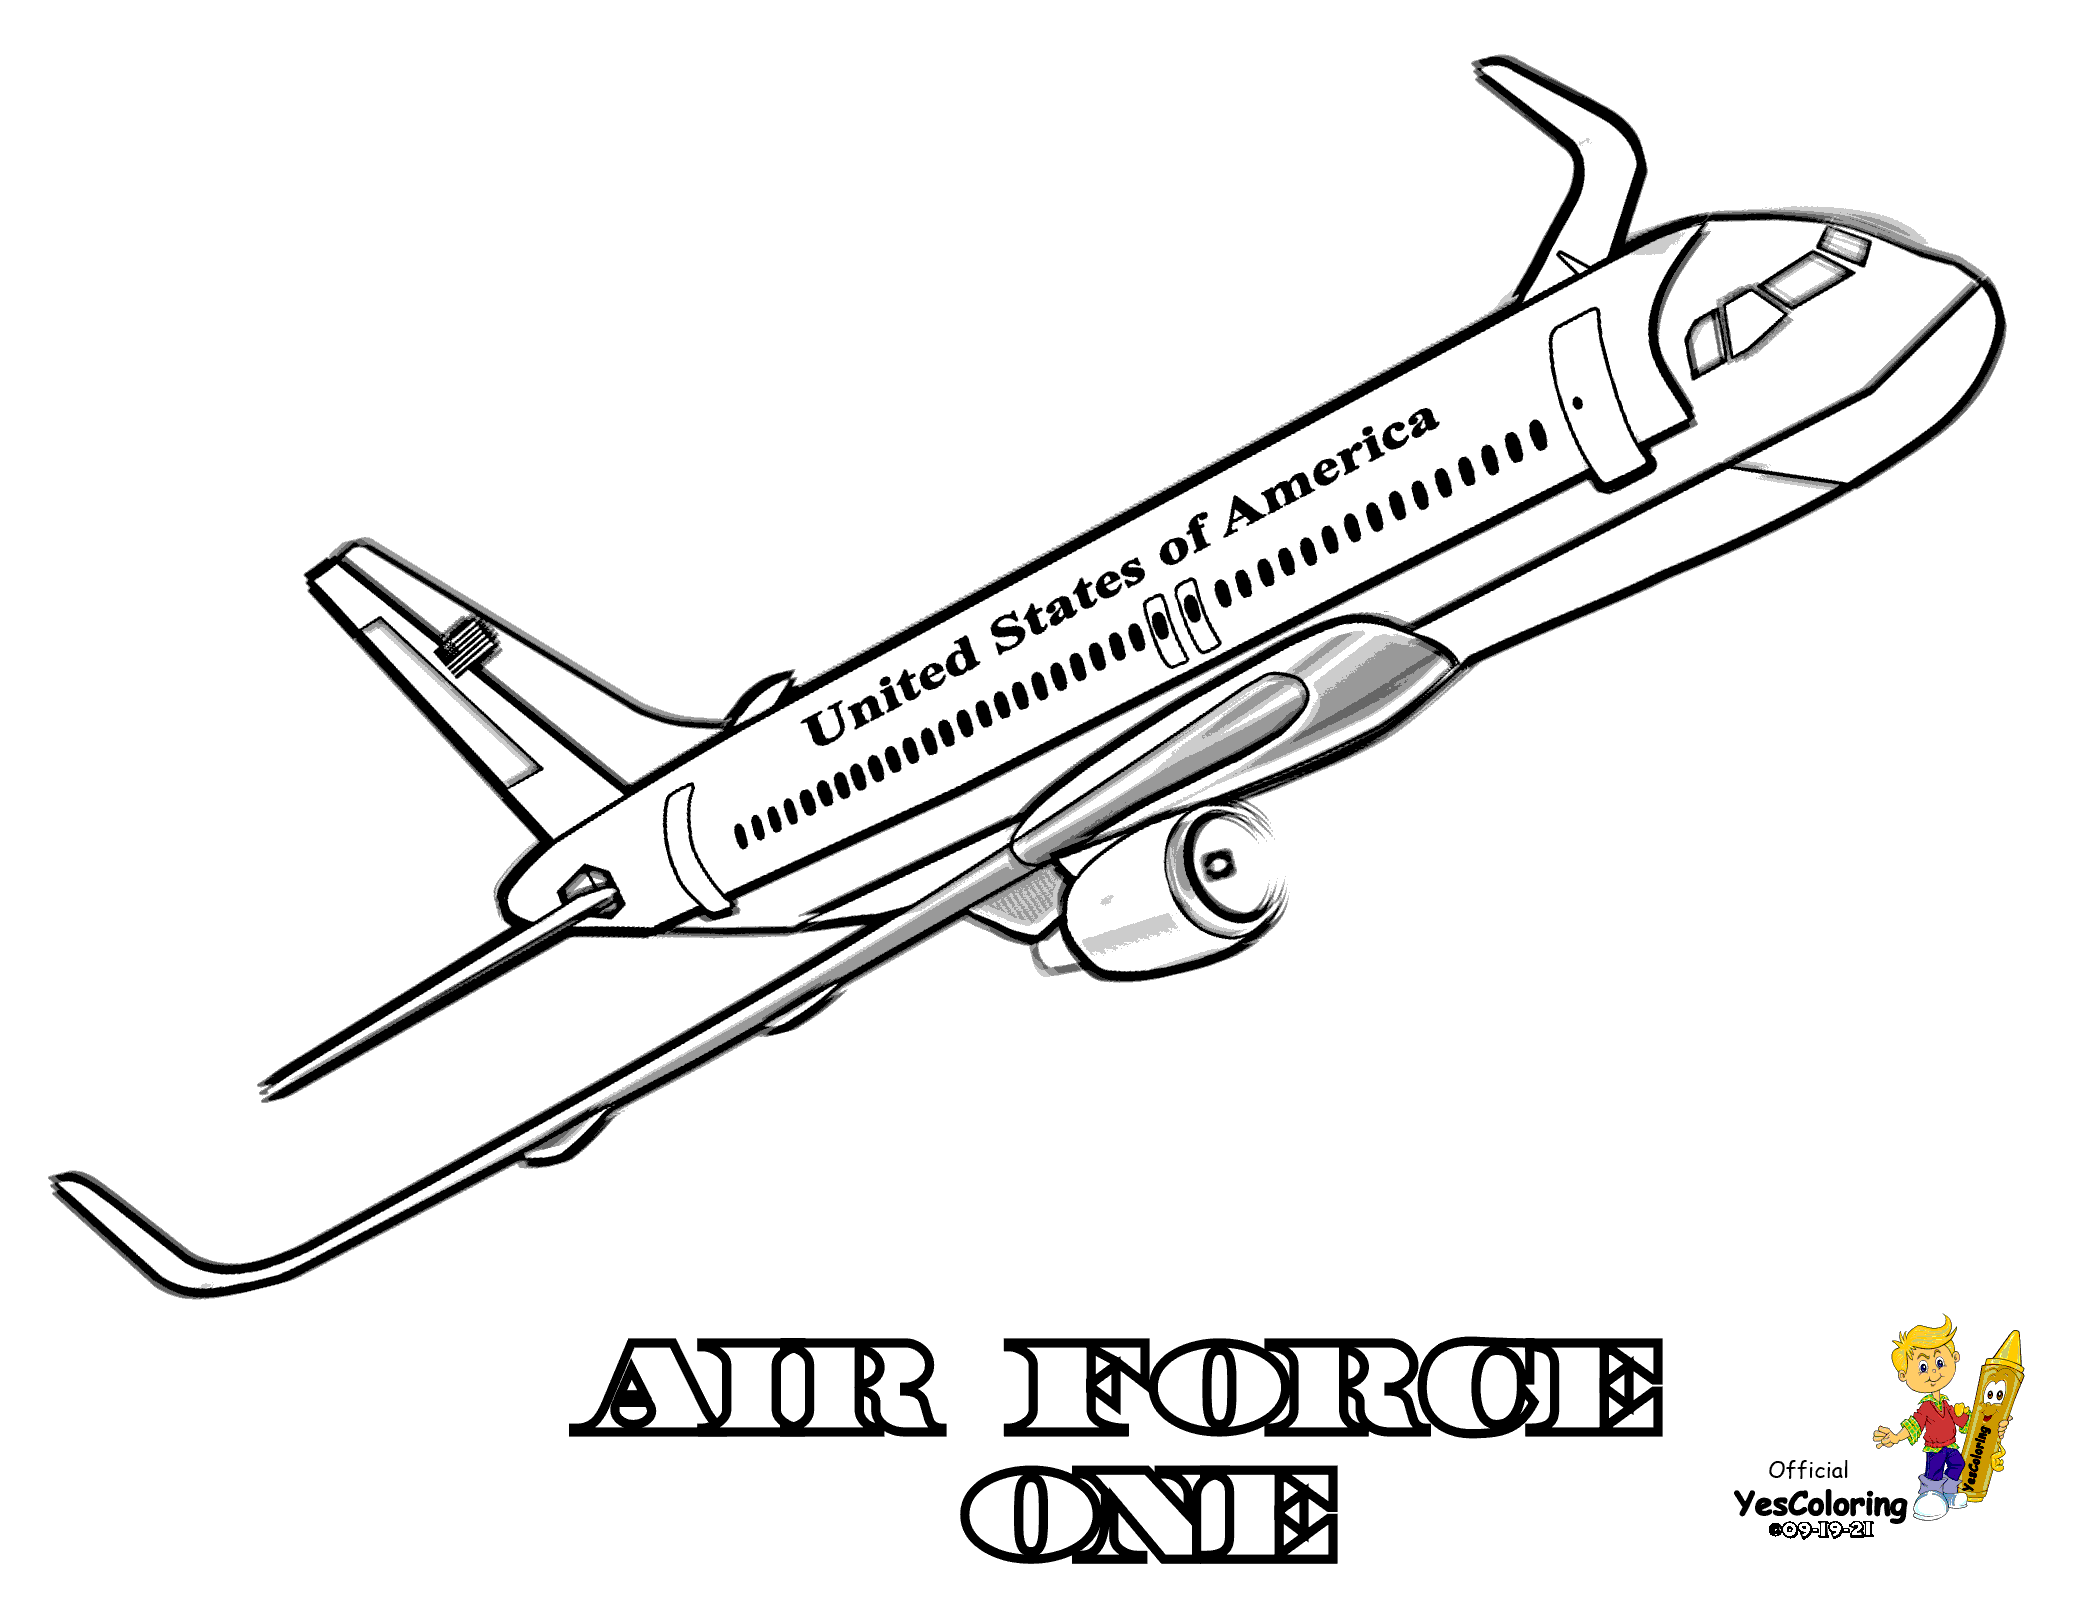 Fierce Airplane Coloring Pictures | 25 Free | Military Air Force Jets